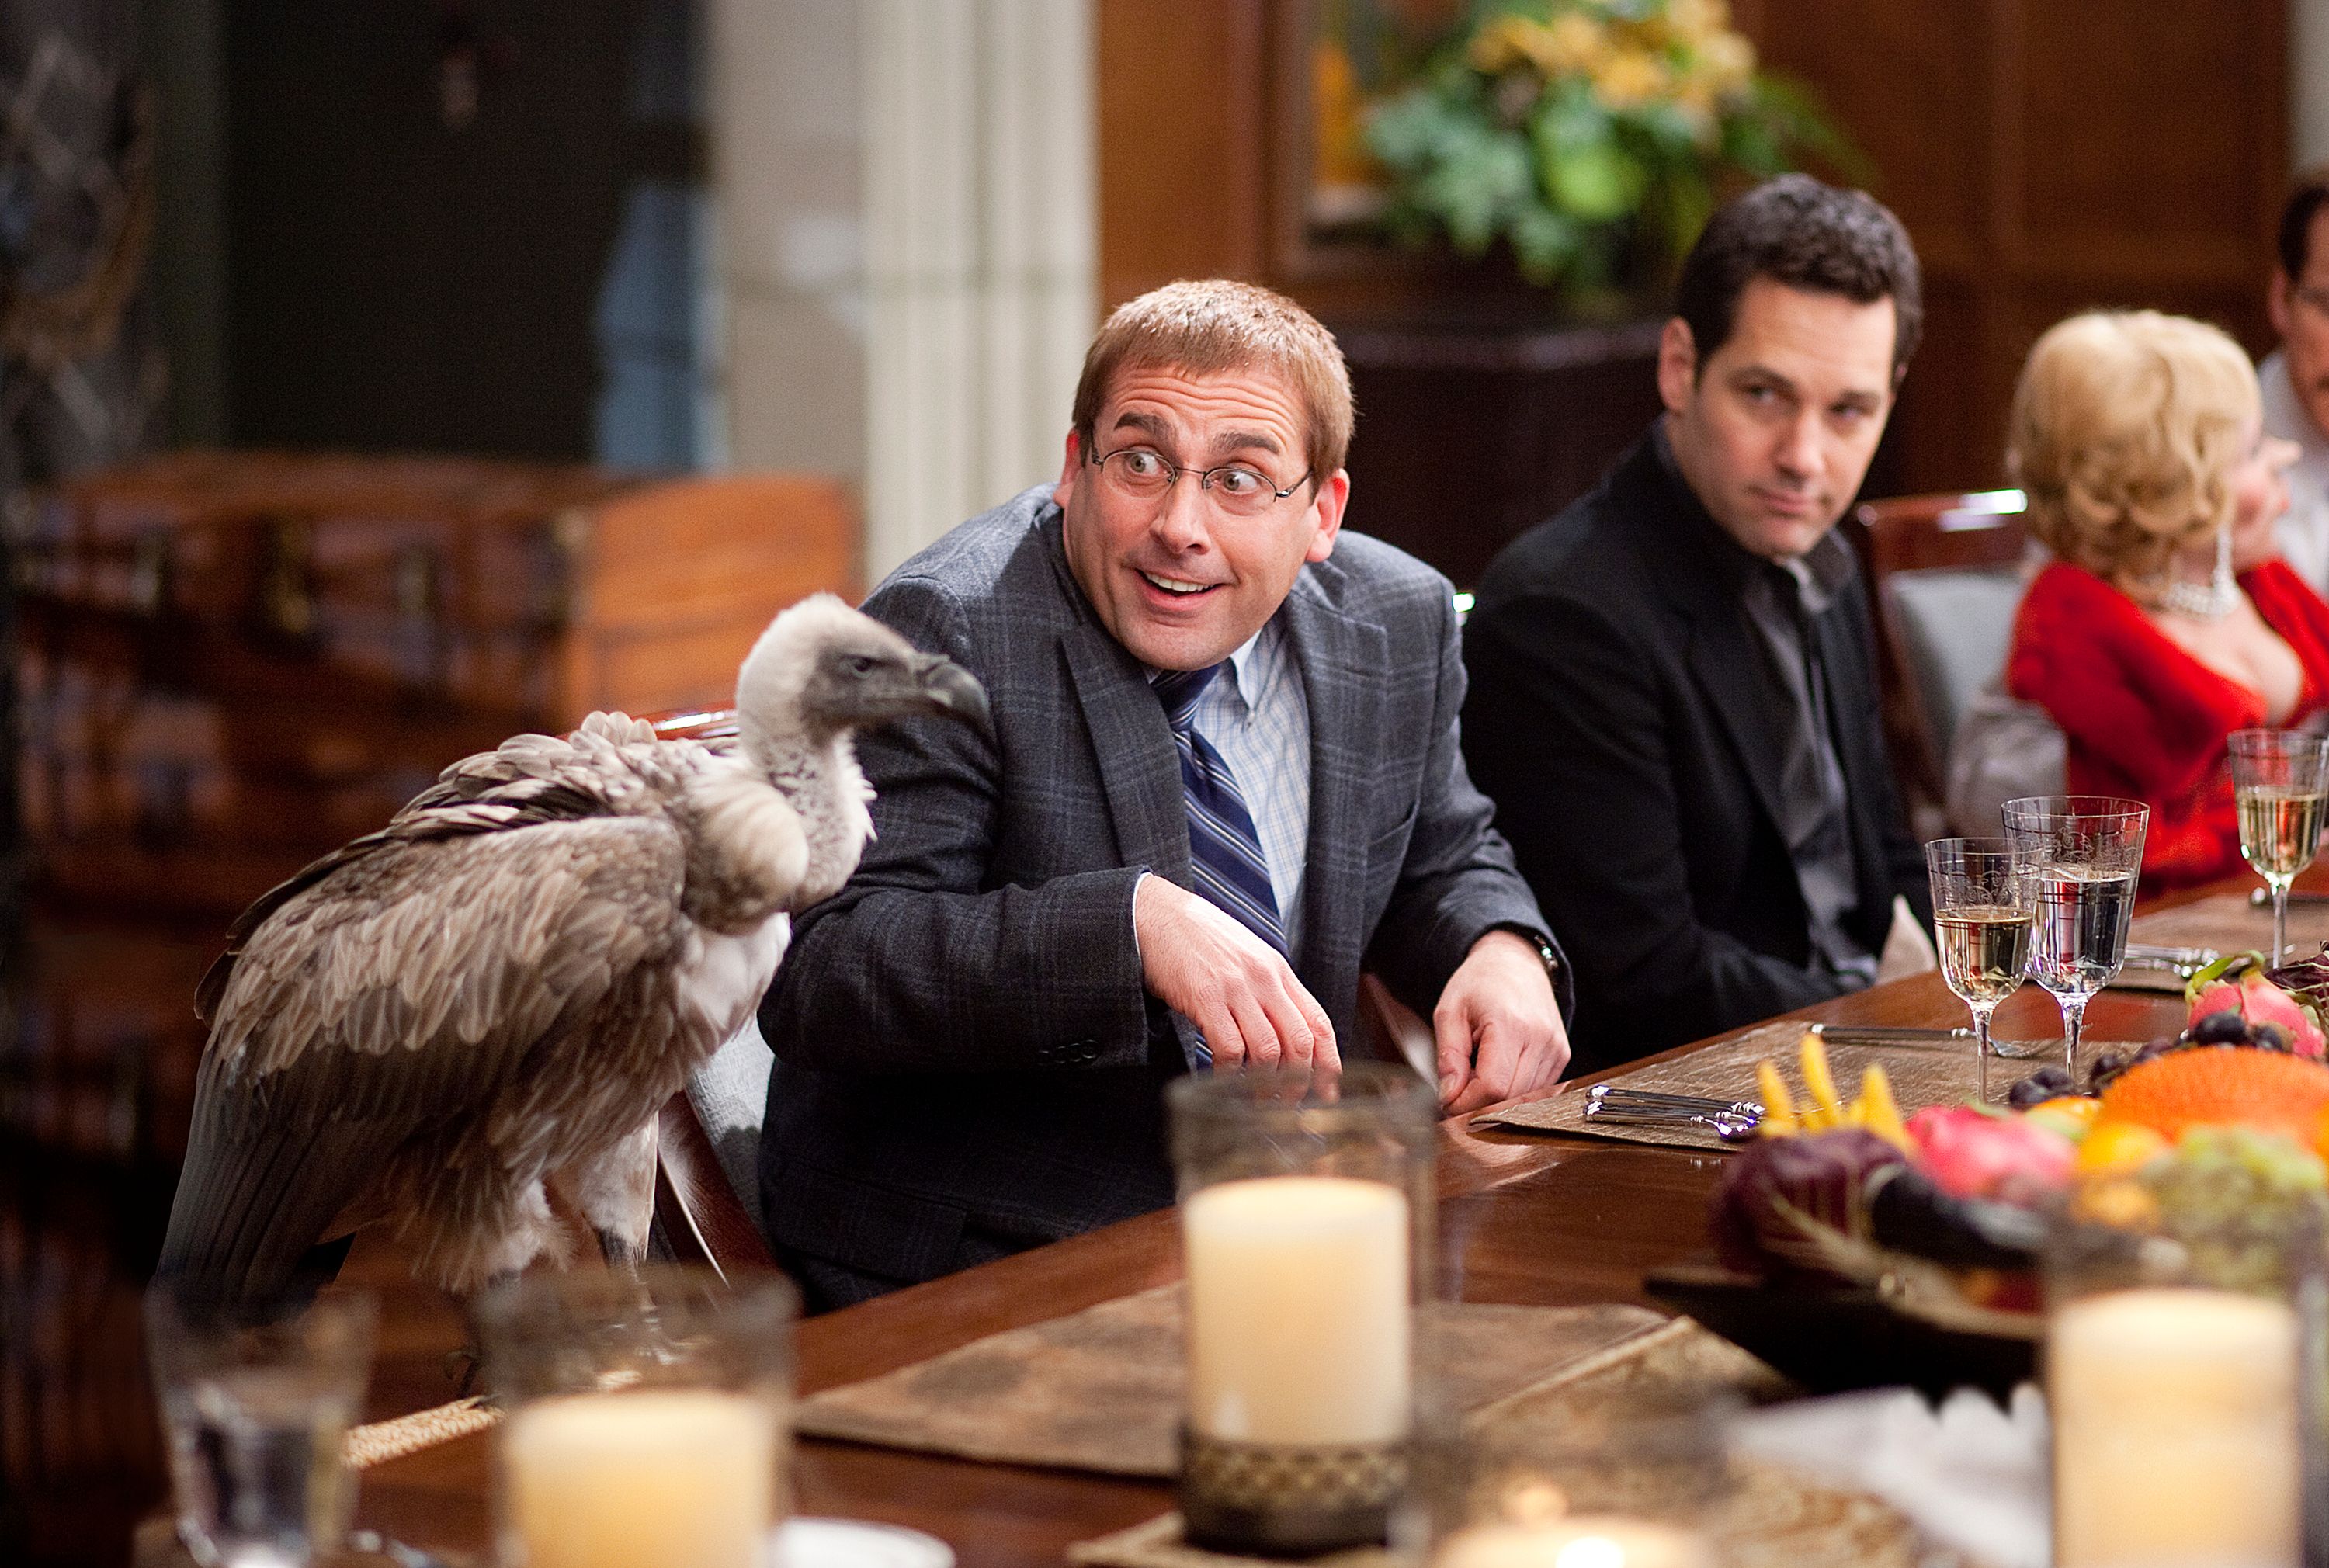 Steve Carell, Paul Rudd and a vulture in Dinner for SchmucksIt truly is a fantastic scene and it's made even funnier with actor {16}, who is probably best known for his various roles on the British TV series Little Britain. We got to chat with him briefly and he told us a bit about how much they were allowed to improvise on the set.